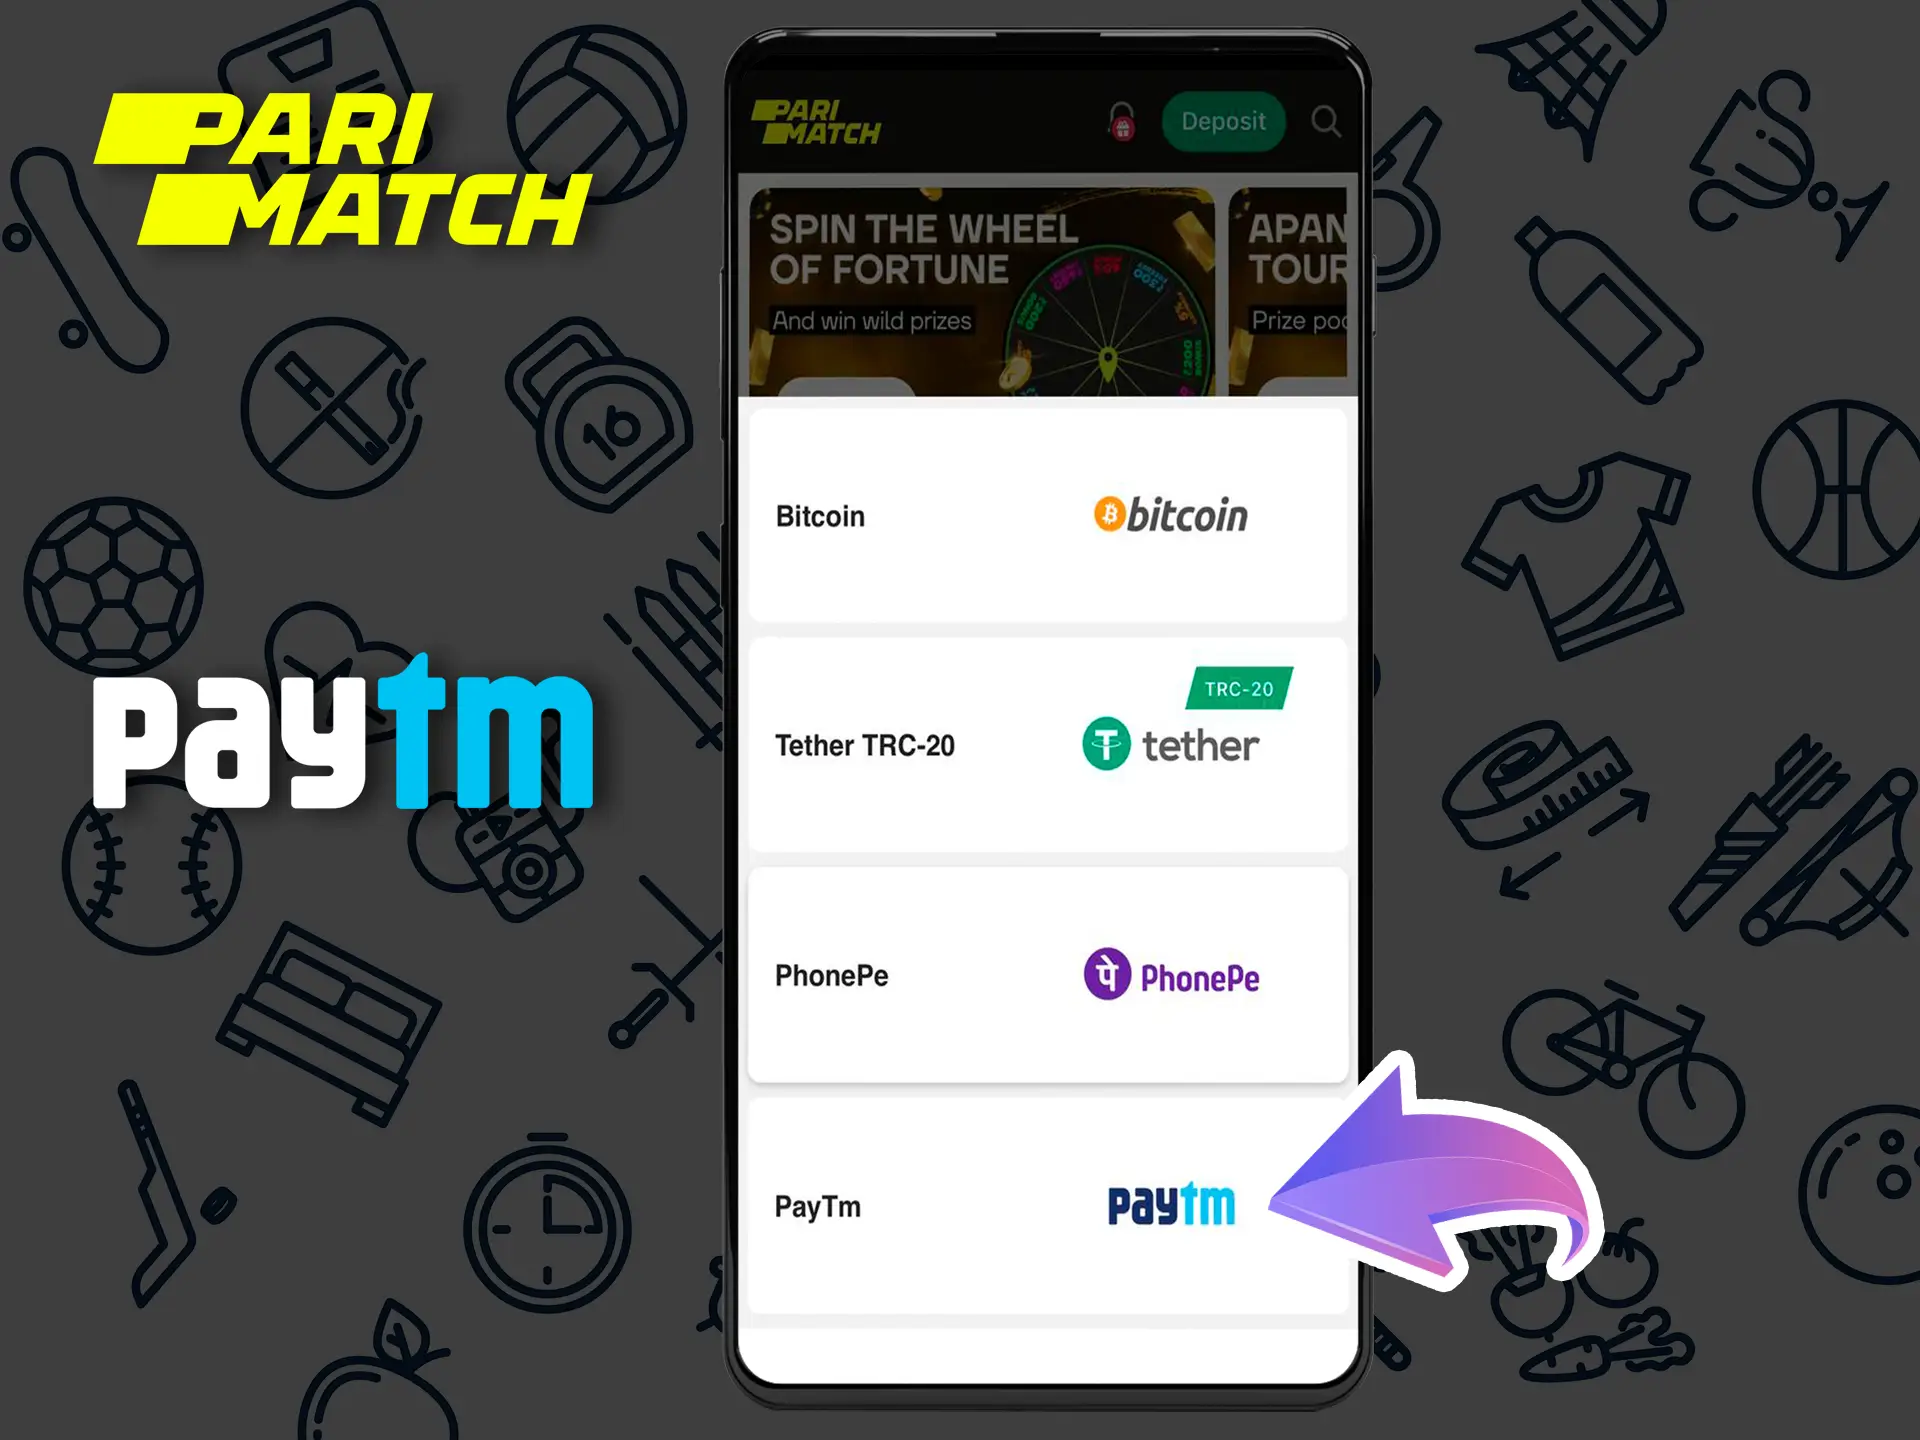 Go to your personal Parimatch account and select top up via PayTM.